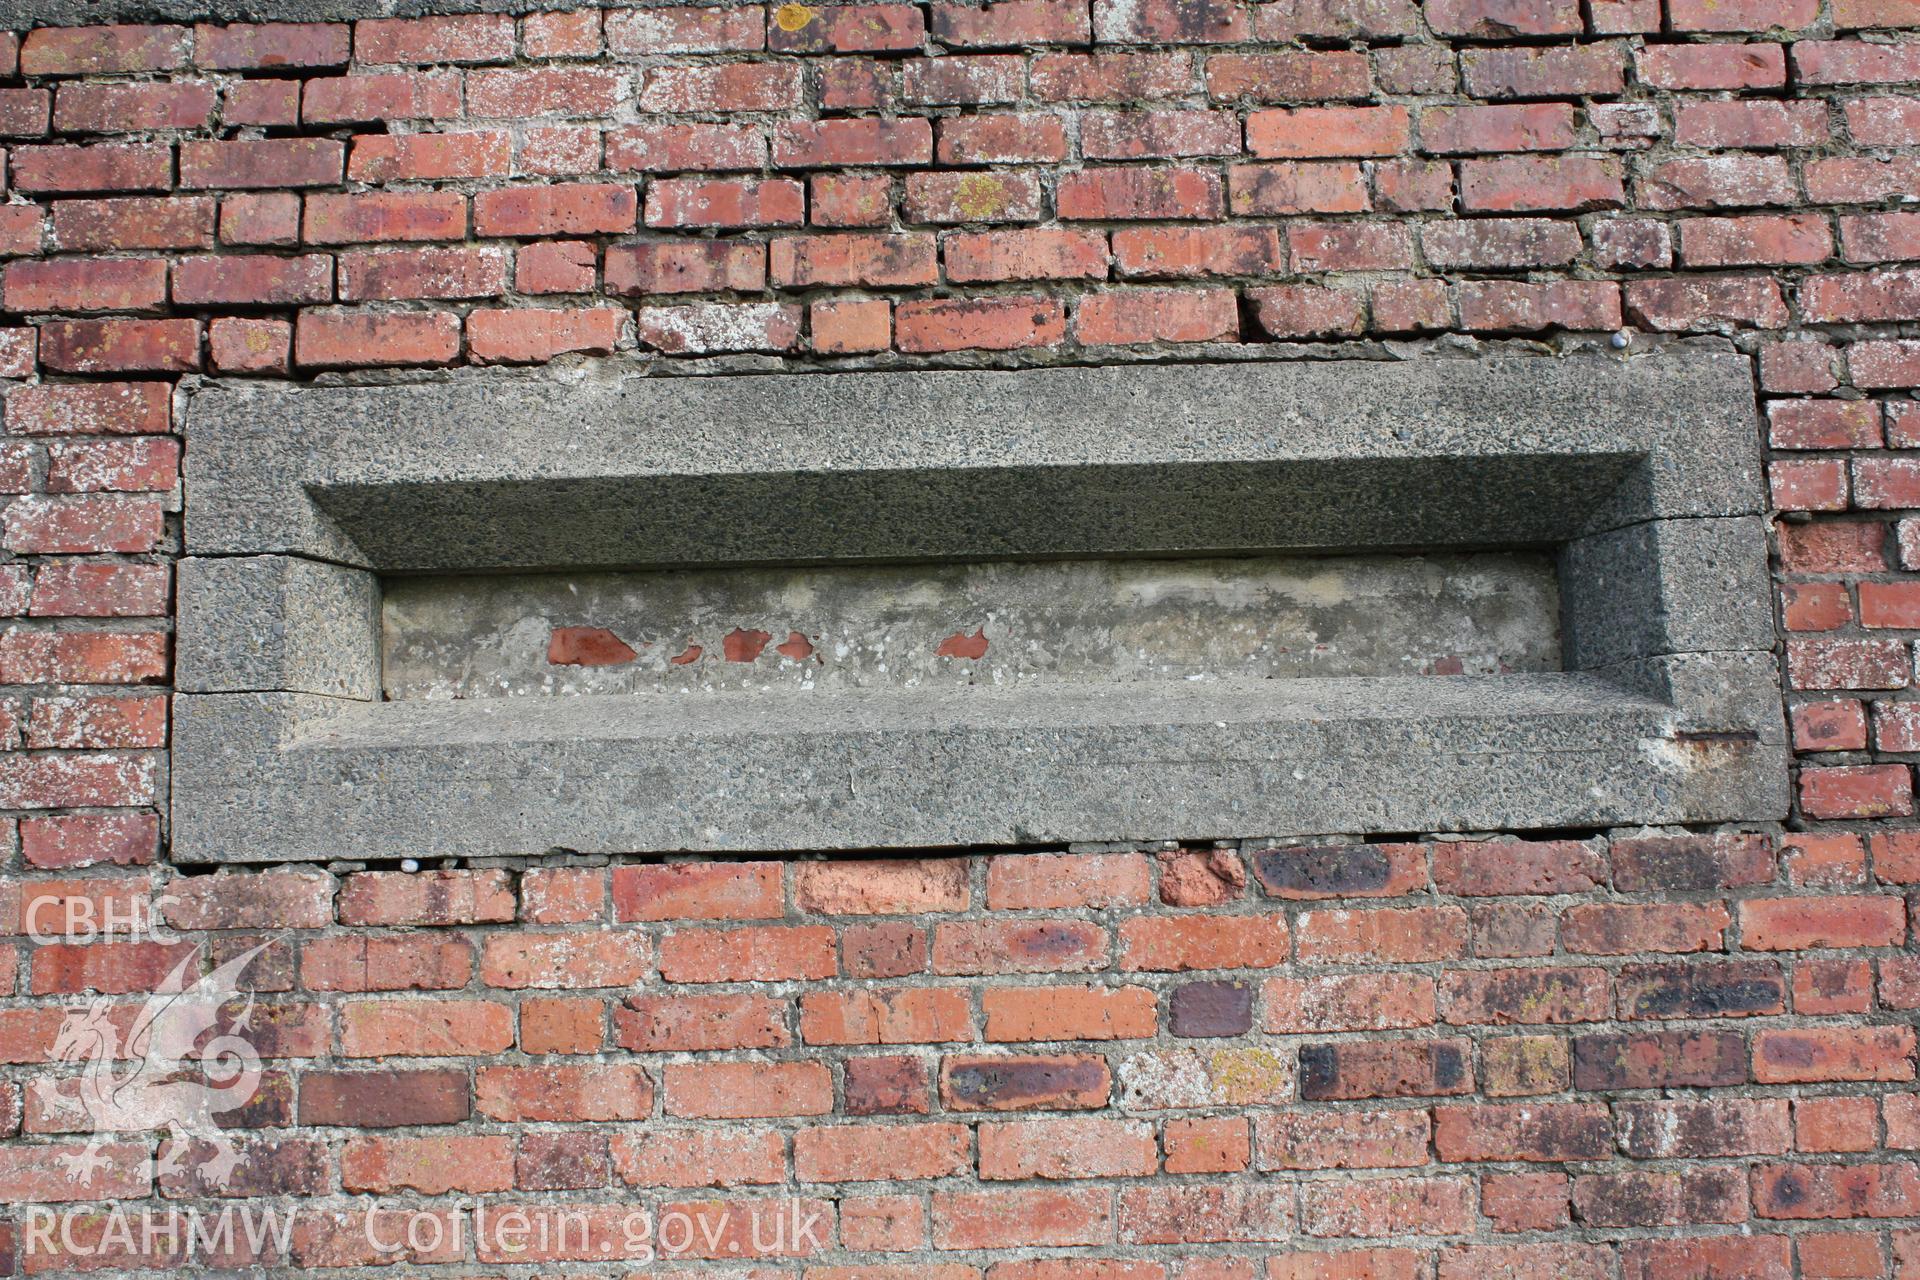 Bricked up observation slit in seaward facade without photoscale